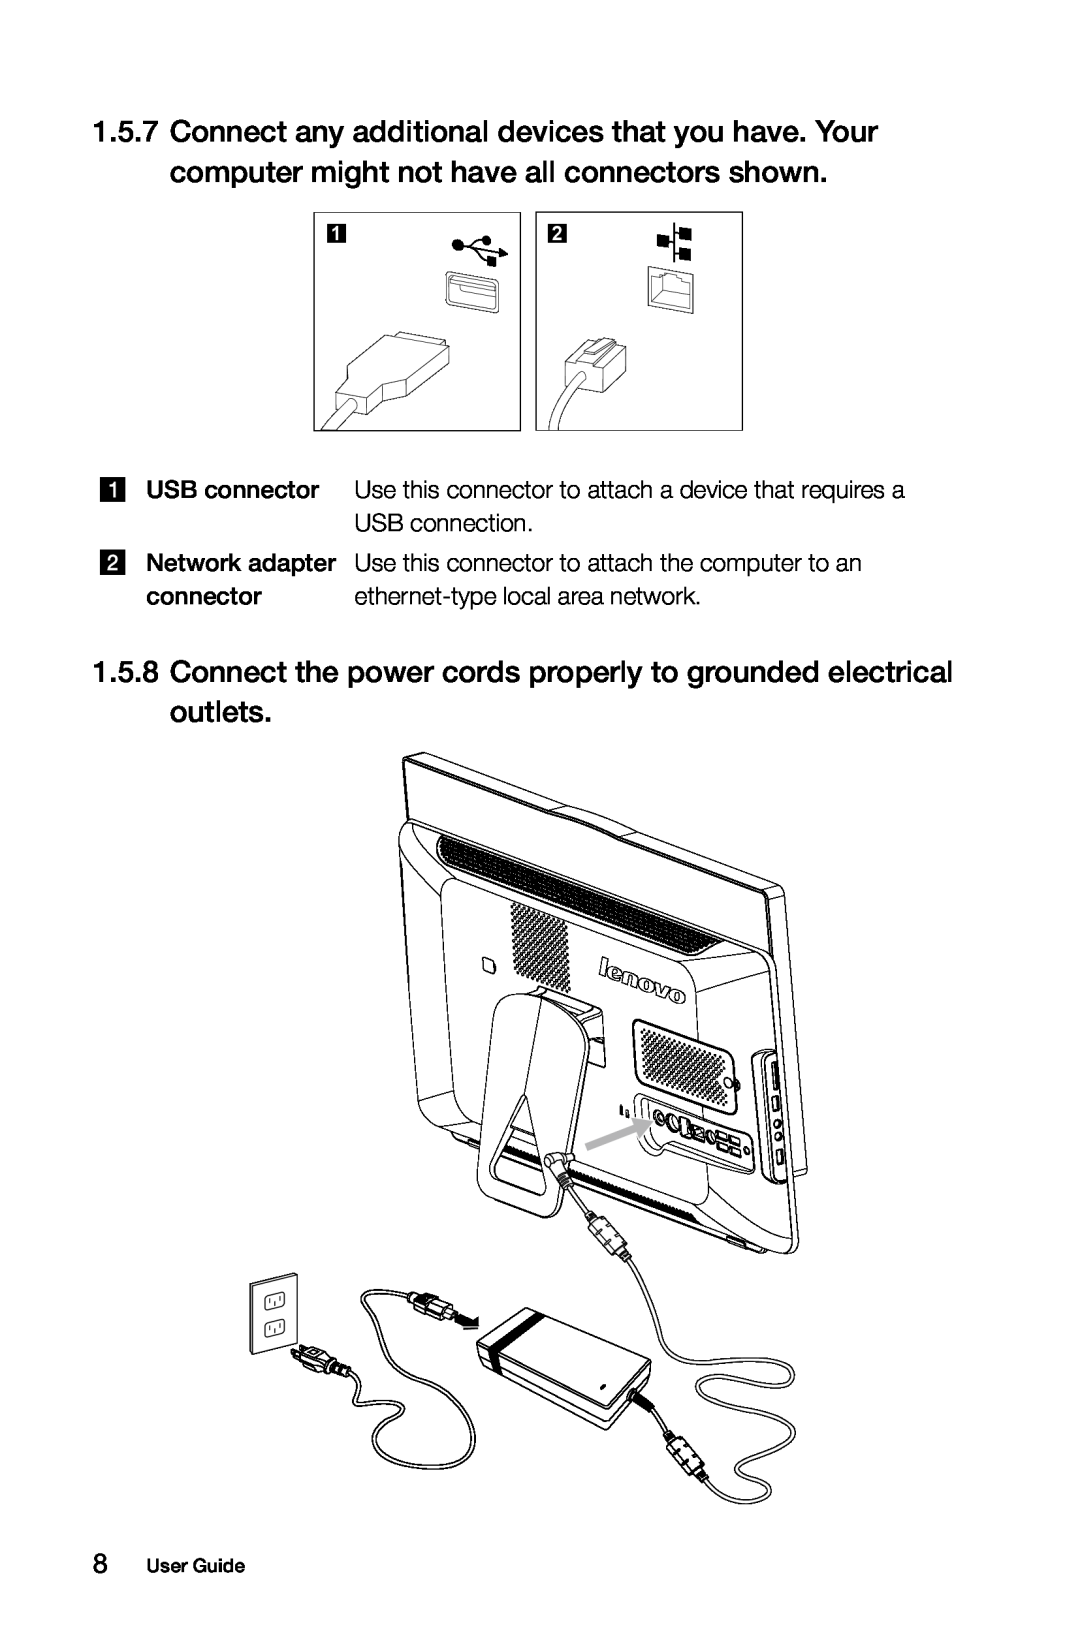 Lenovo 10051, B3 Connect the power cords properly to grounded electrical outlets, Network adapter, connector, User Guide 